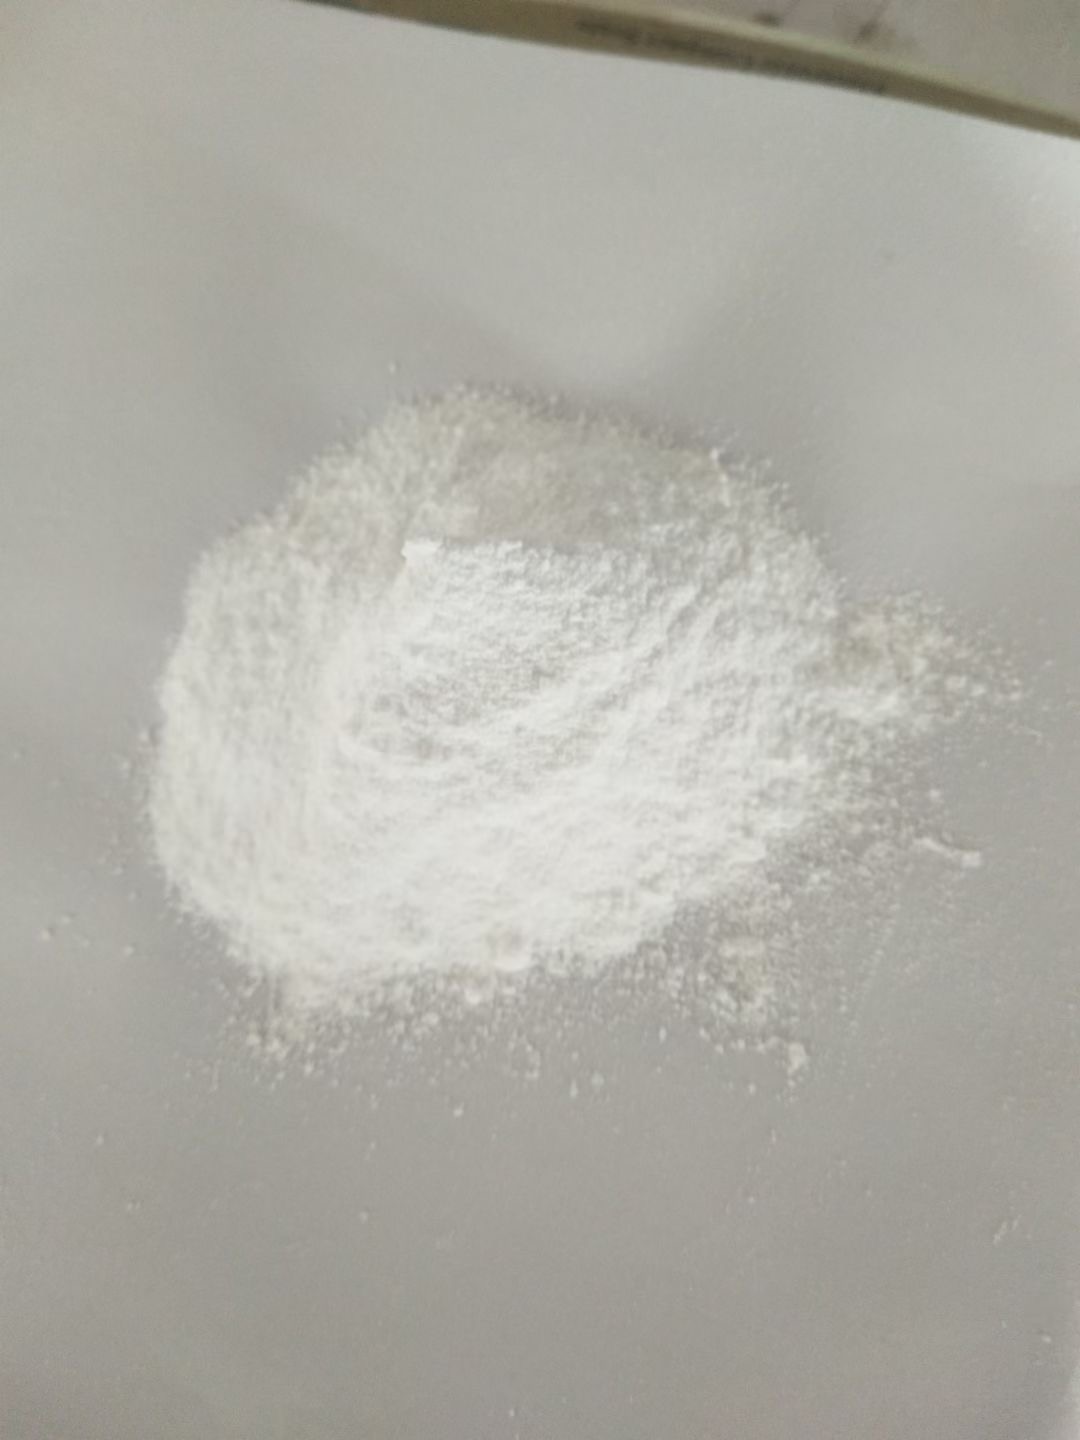 Magnesium Chloride Anhydrous-Magnesium Chloride 99%